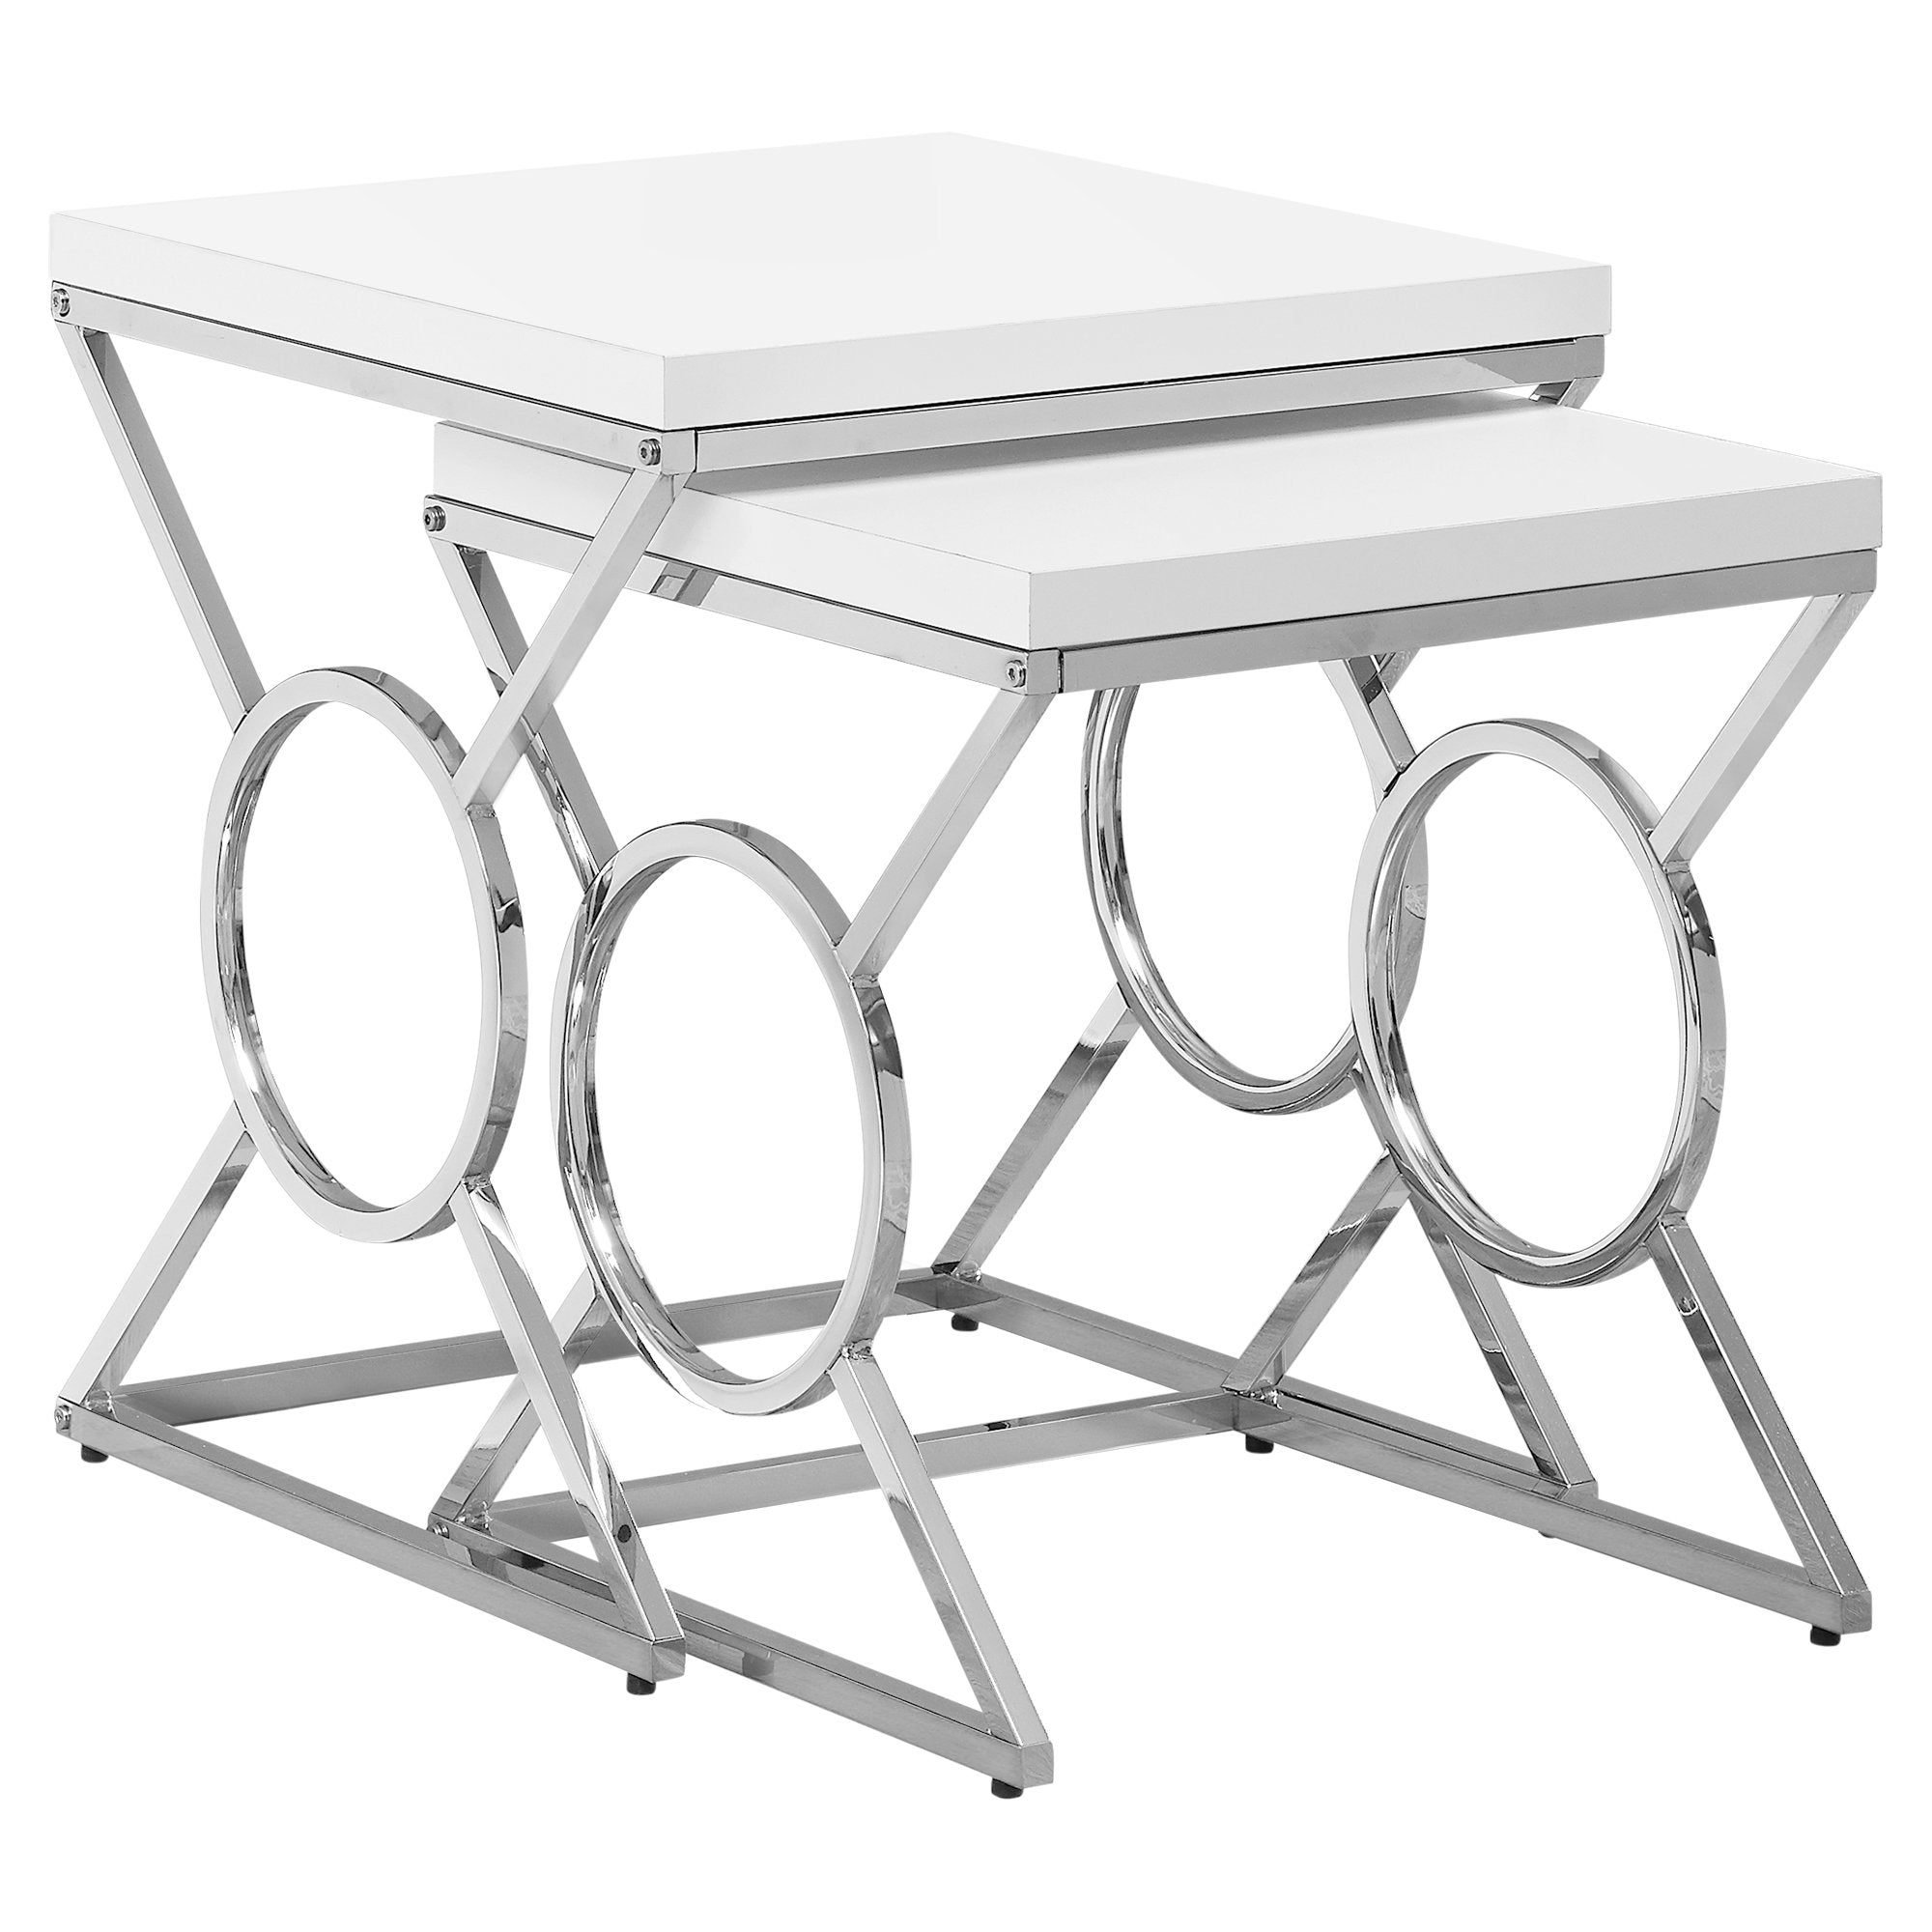 MN-443401    Nesting Table, Set Of 2, Side, End, Metal, Accent, Living Room, Bedroom, Metal Base, Laminate, Glossy White, Chrome, Contemporary, Modern